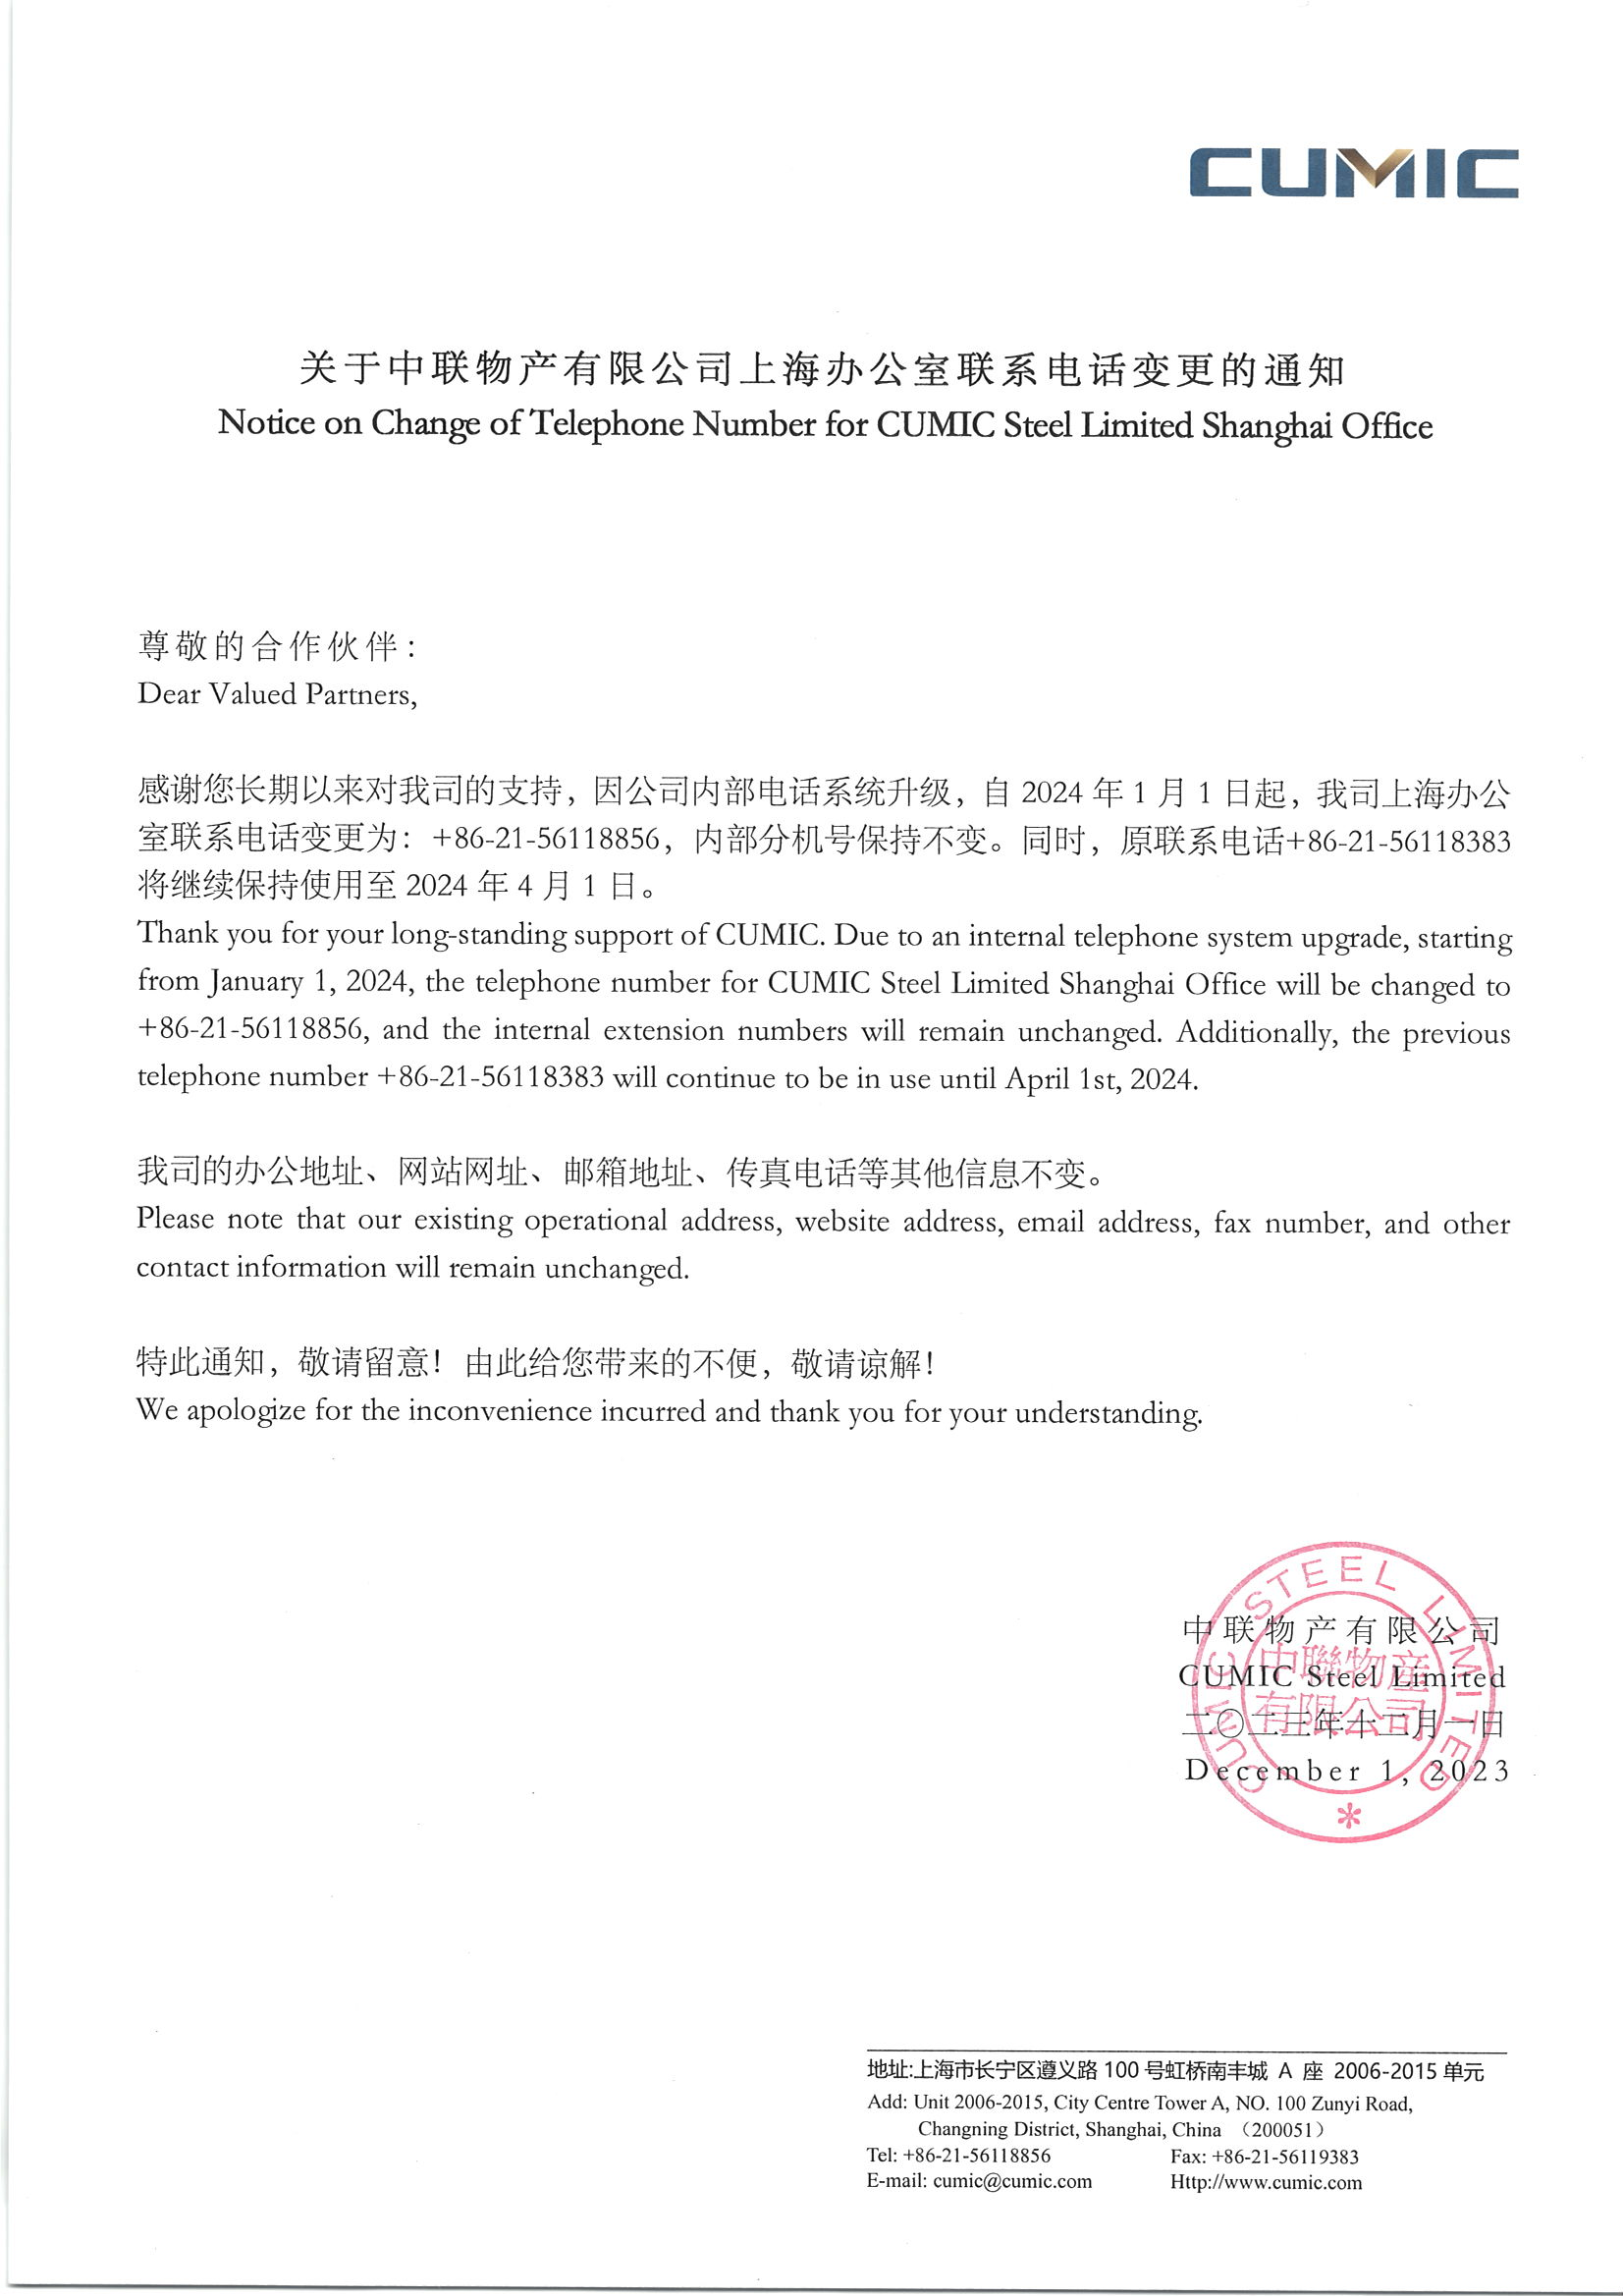 notice-on-change-of-telephone-number-for-cumic-steel-limited-shanghai-office.png